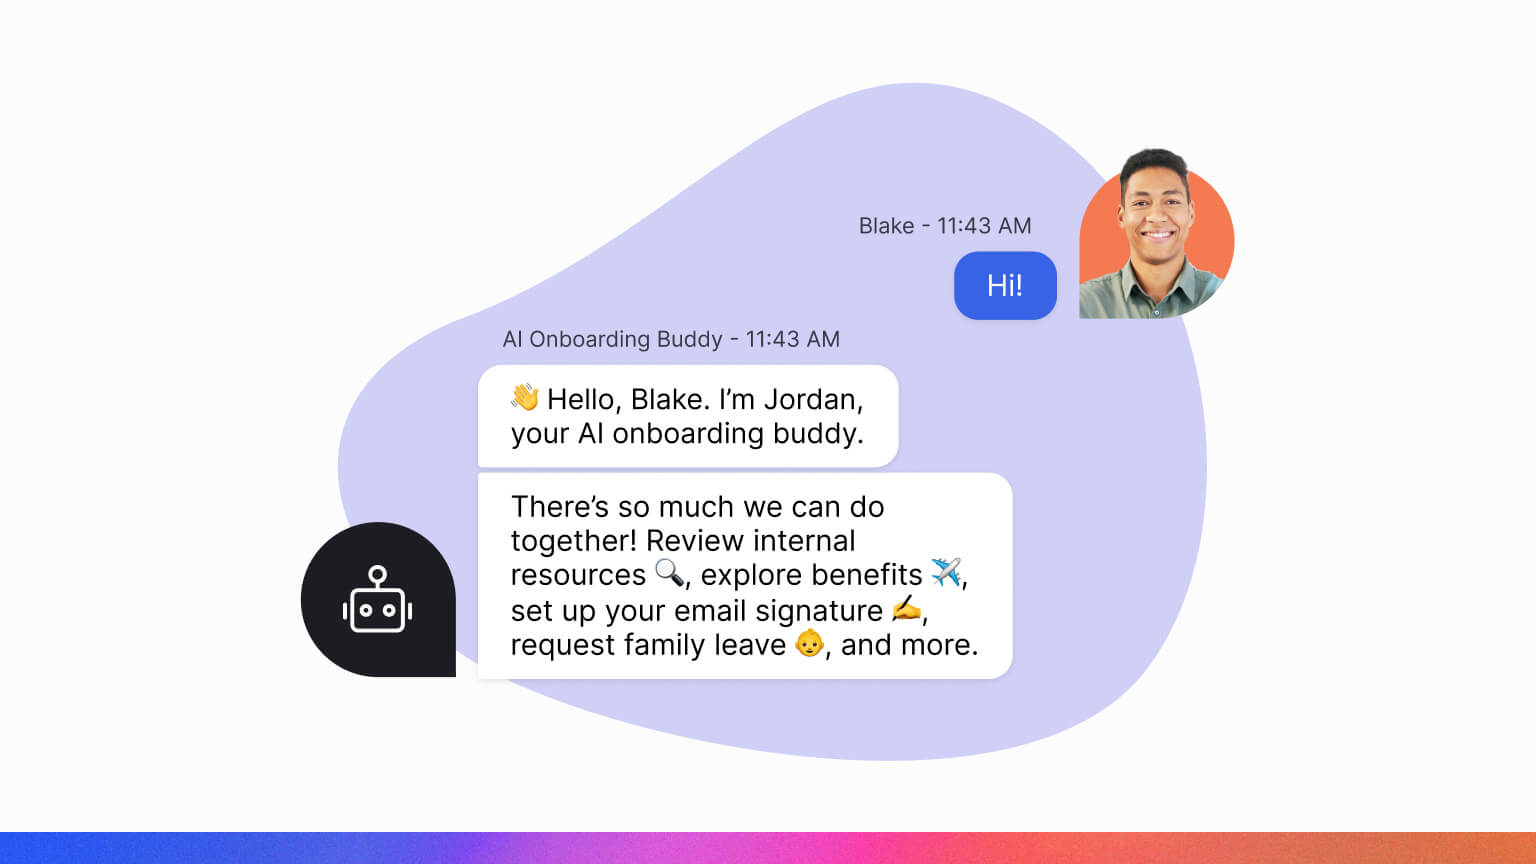 Conversational AI software being used for employee support, acting as an onboarding buddy